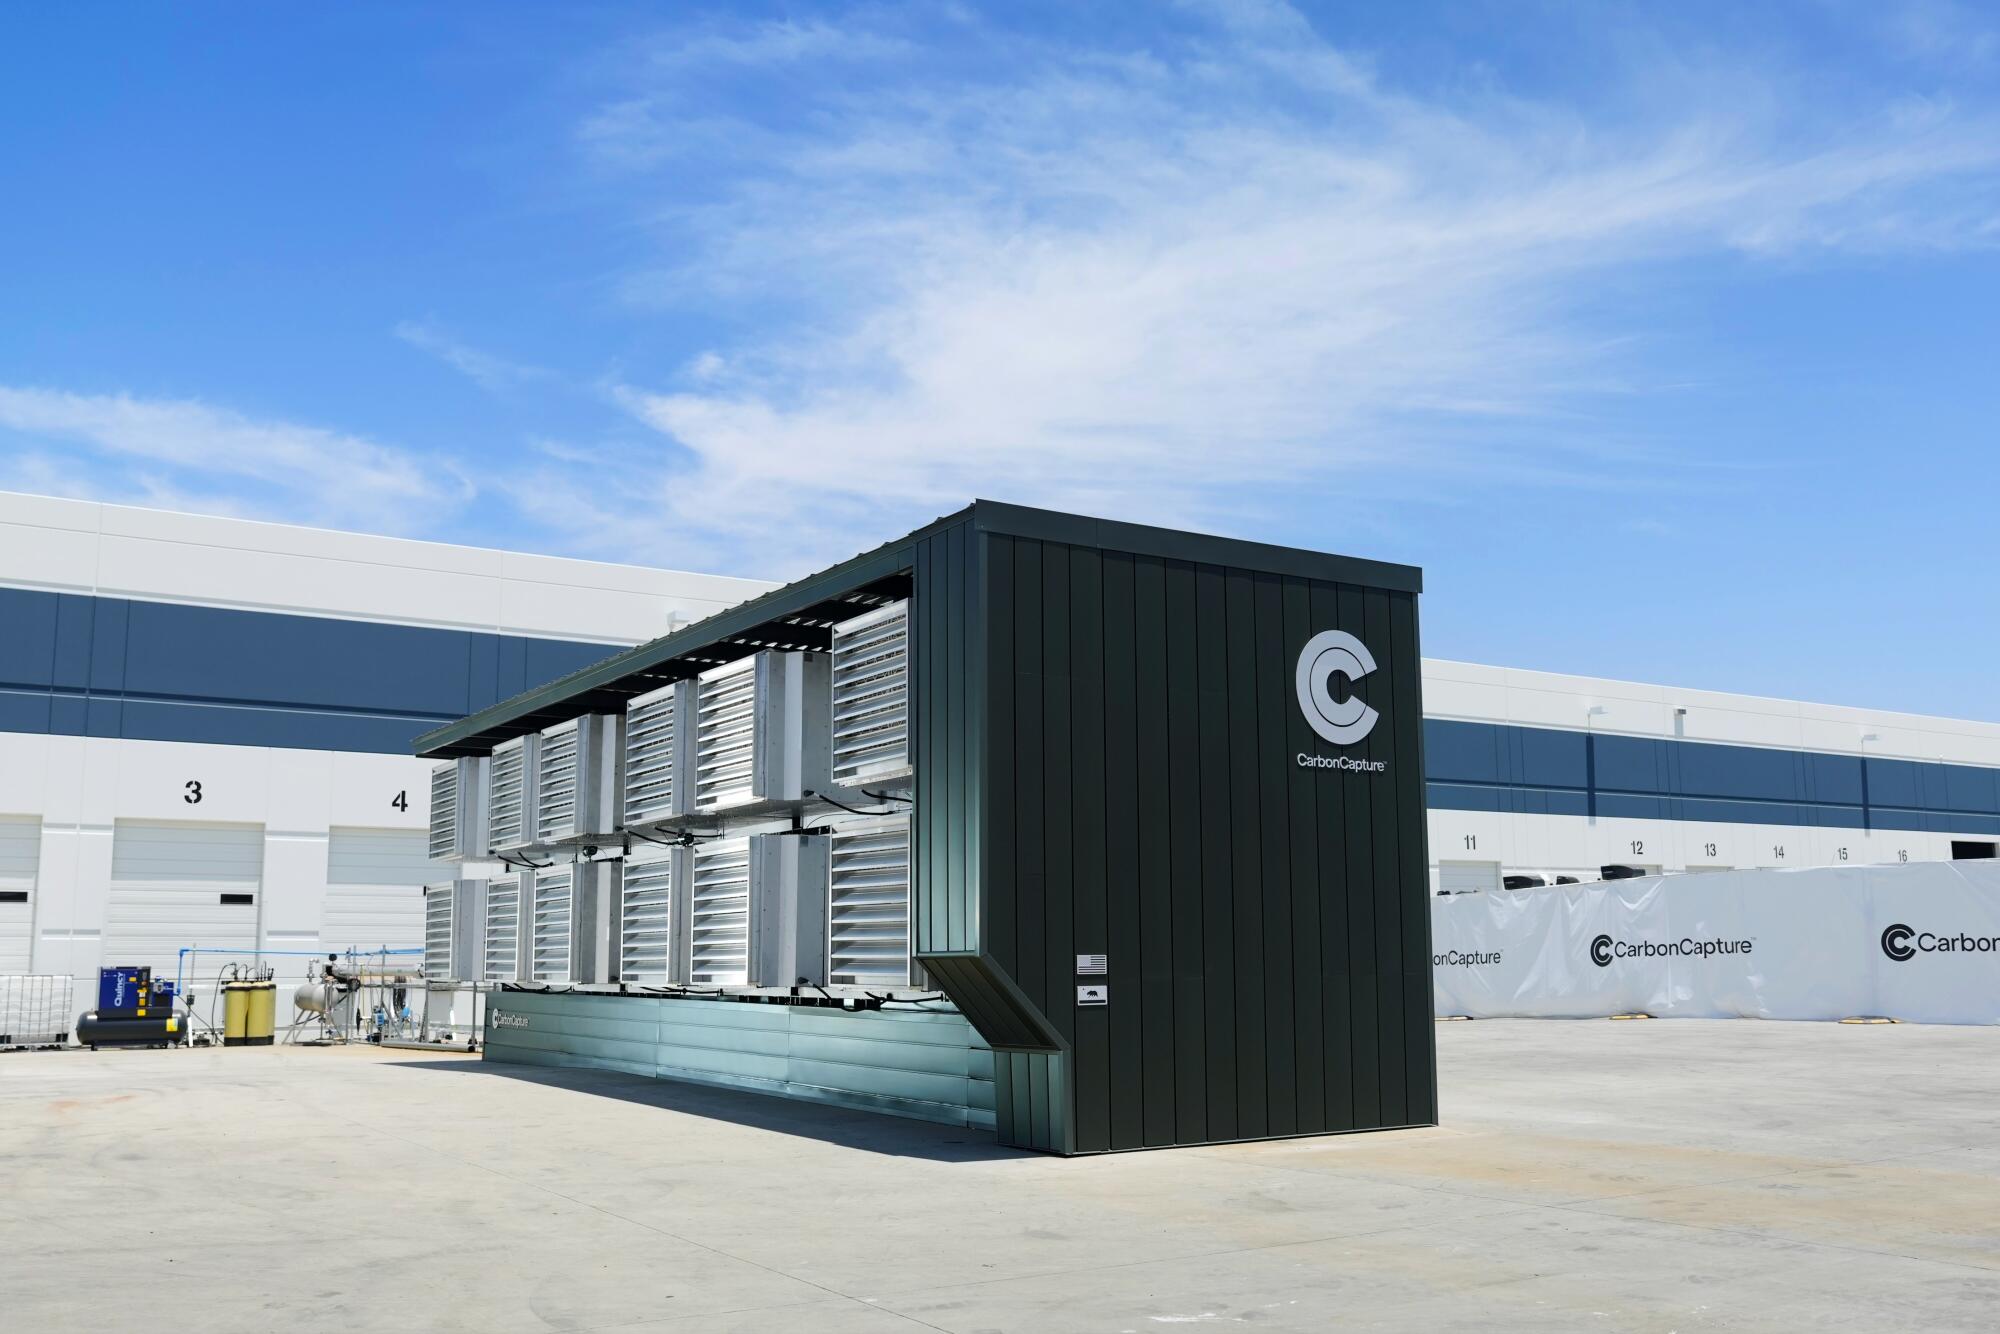 A large rectangular metal box sits outside under a blue sky.